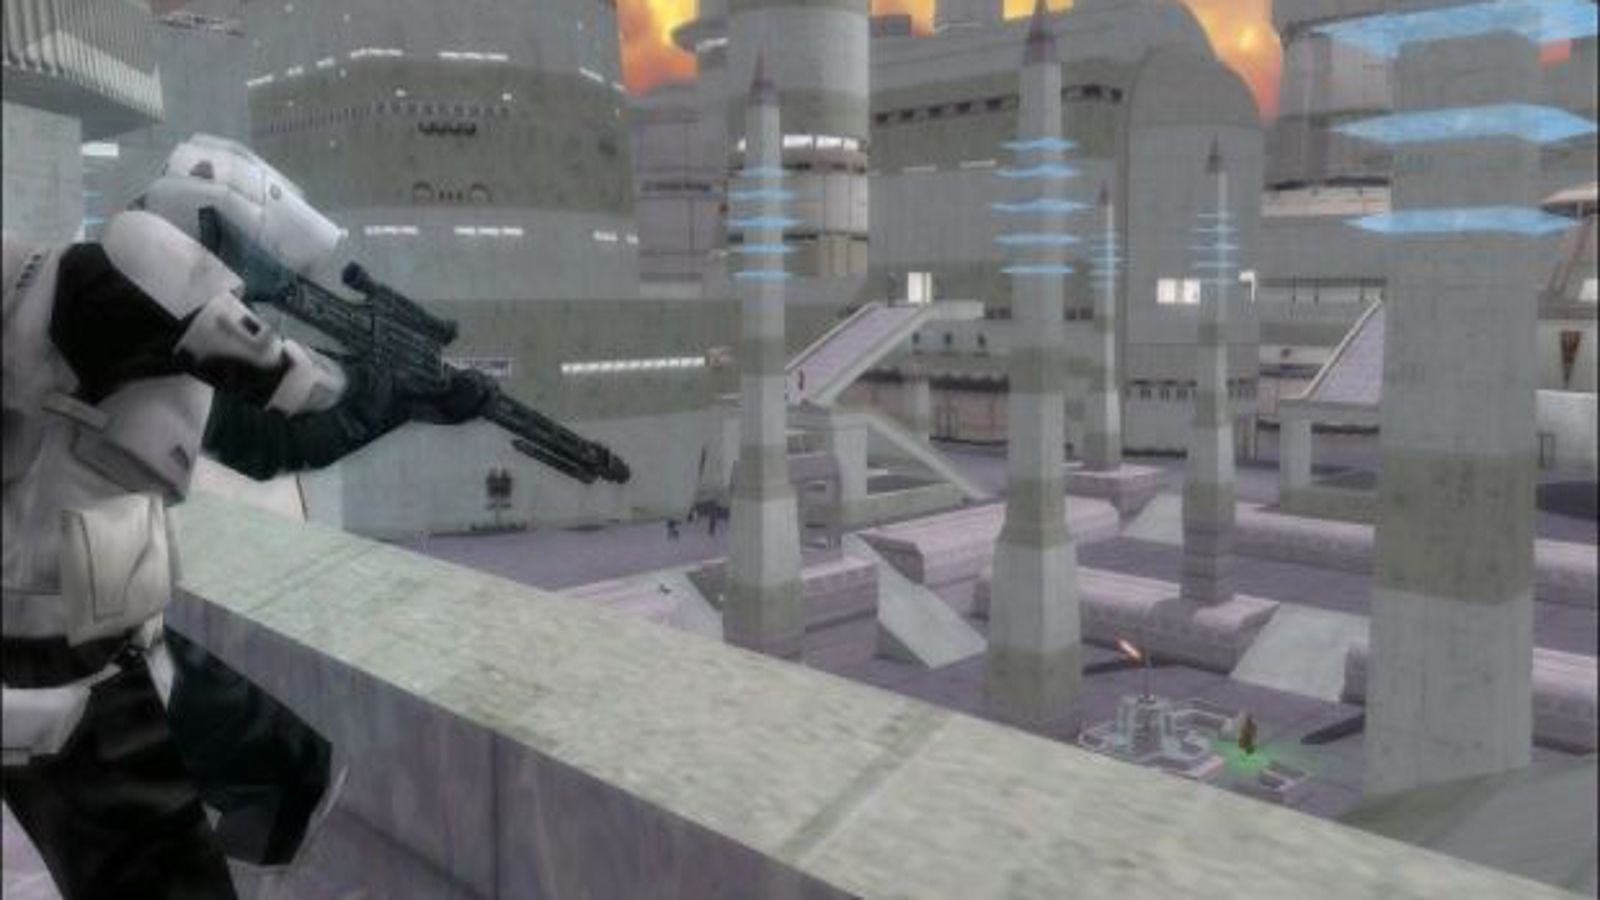 Star Wars Battlefront 2 2005 Graphics Mod Gives the Game Updated Visuals